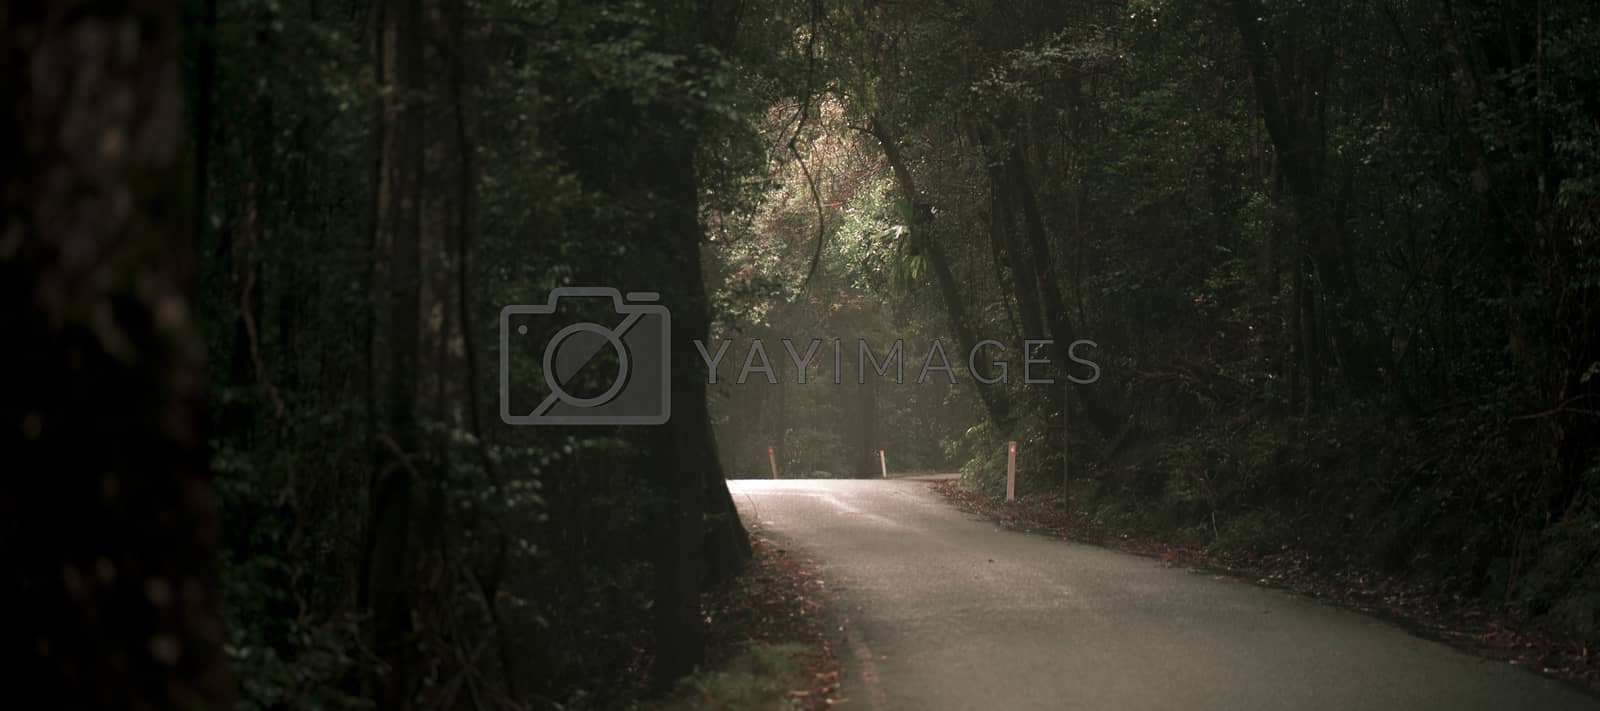 Royalty free image of Moody hazy road in the forest. by artistrobd